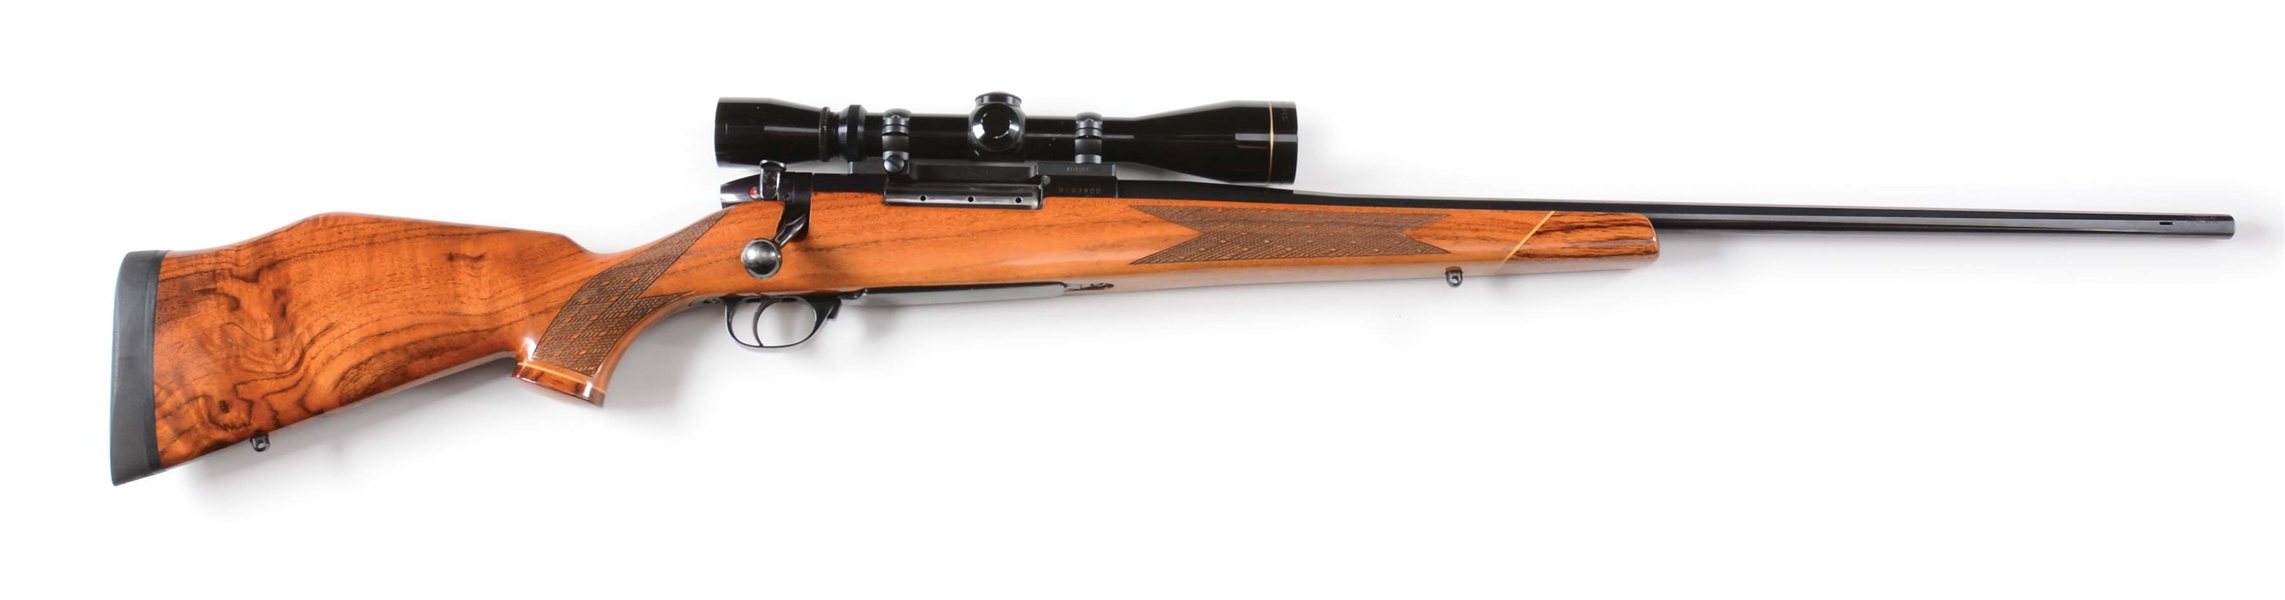 (M) WEATHERBY MARK V BOLT ACTION RIFLE WITH LEUPOLD SCOPE, CALIBER .340 WEATHERBY MAGNUM.